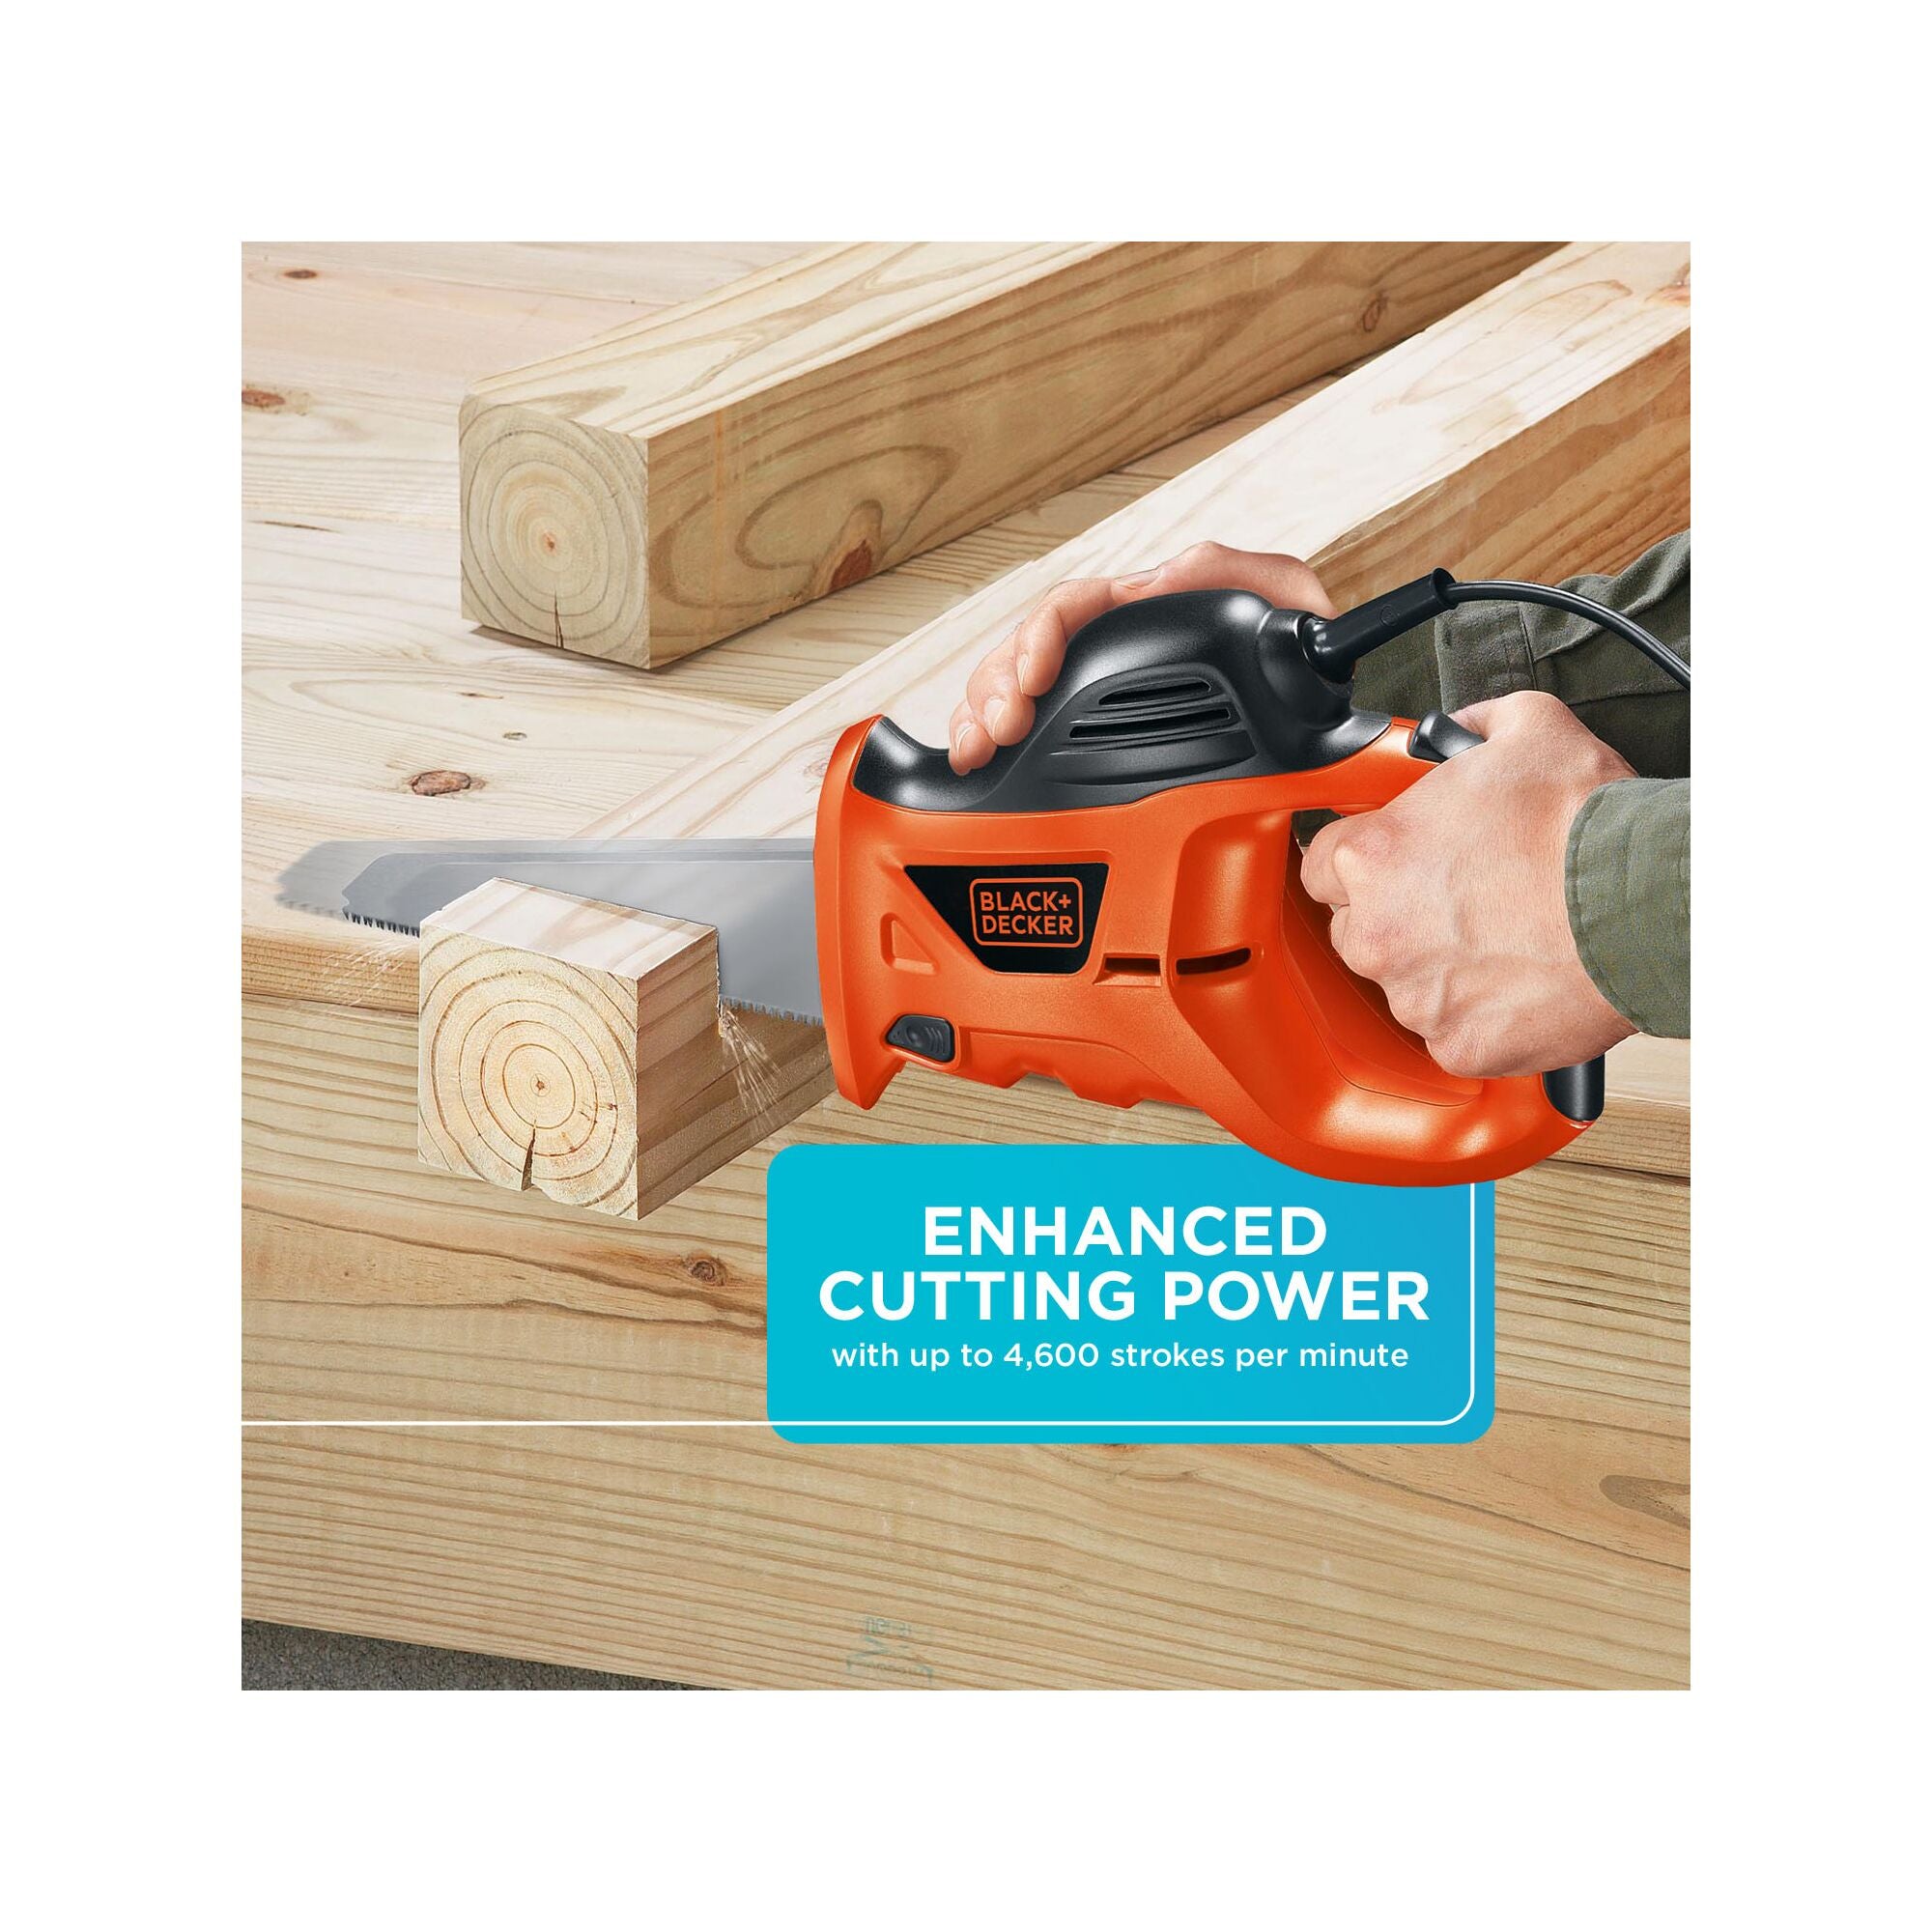 Have a question about BLACK+DECKER 3.4 Amp Powered Hand Saw? - Pg